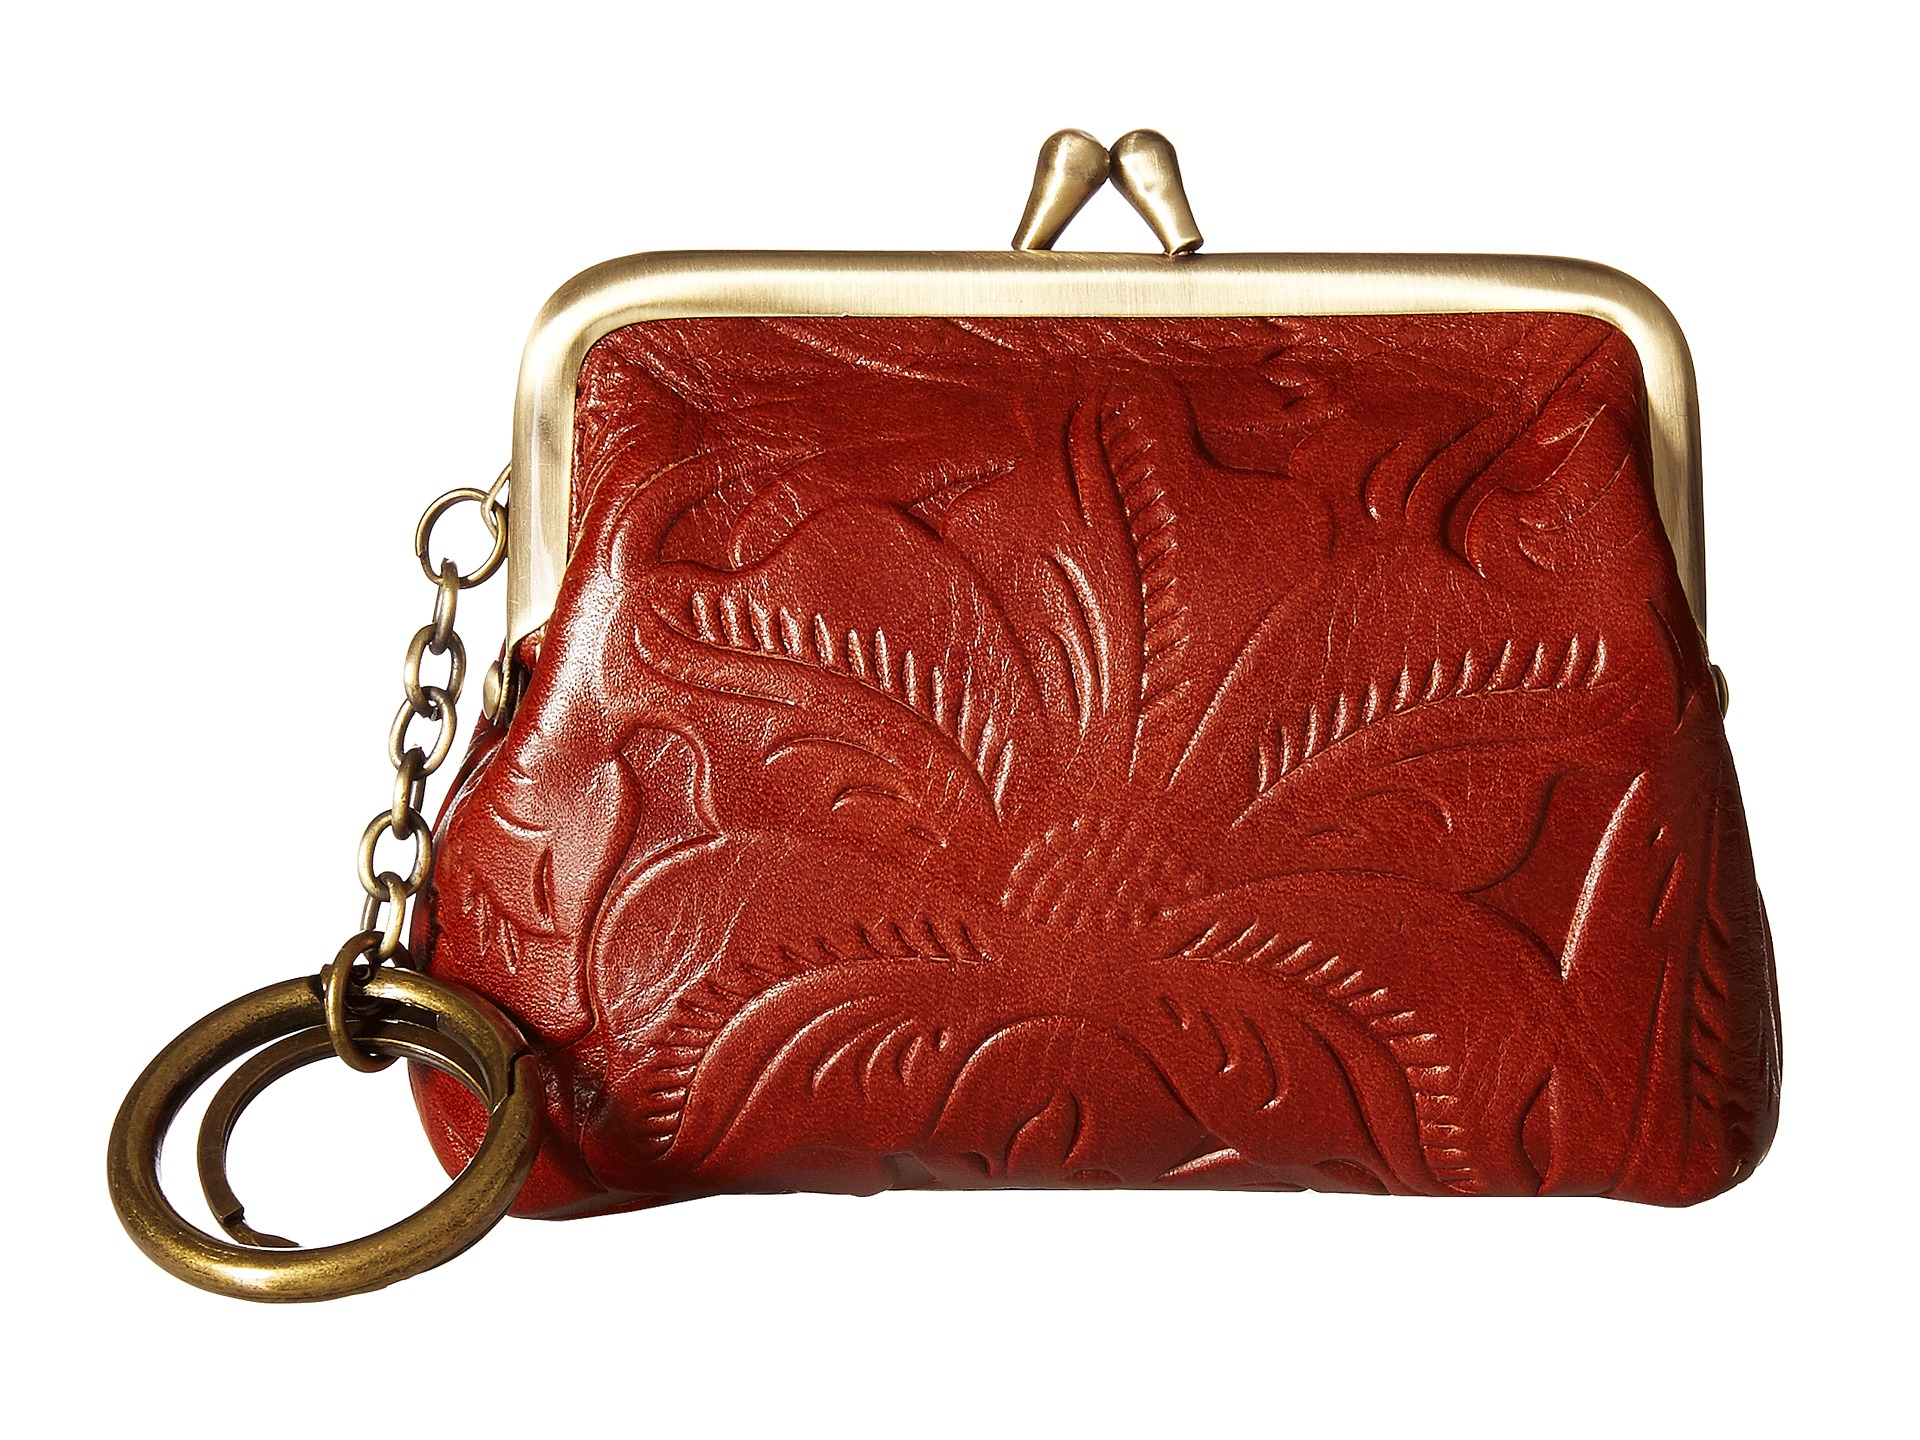 Patricia Nash Large Borse Coin Purse in Red | Lyst